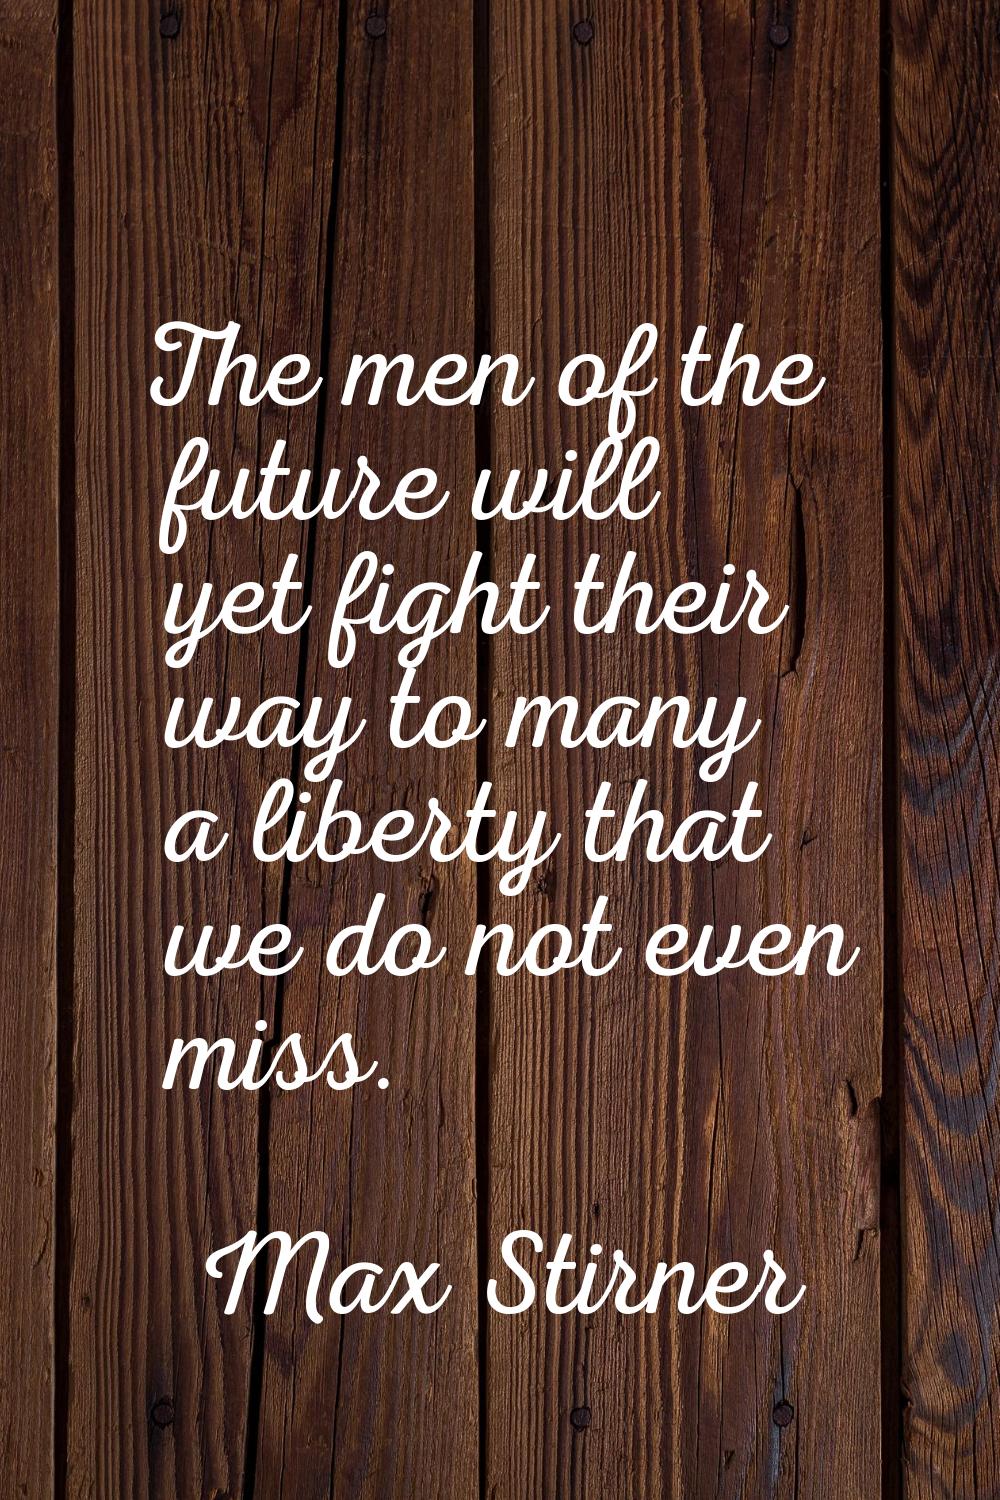 The men of the future will yet fight their way to many a liberty that we do not even miss.